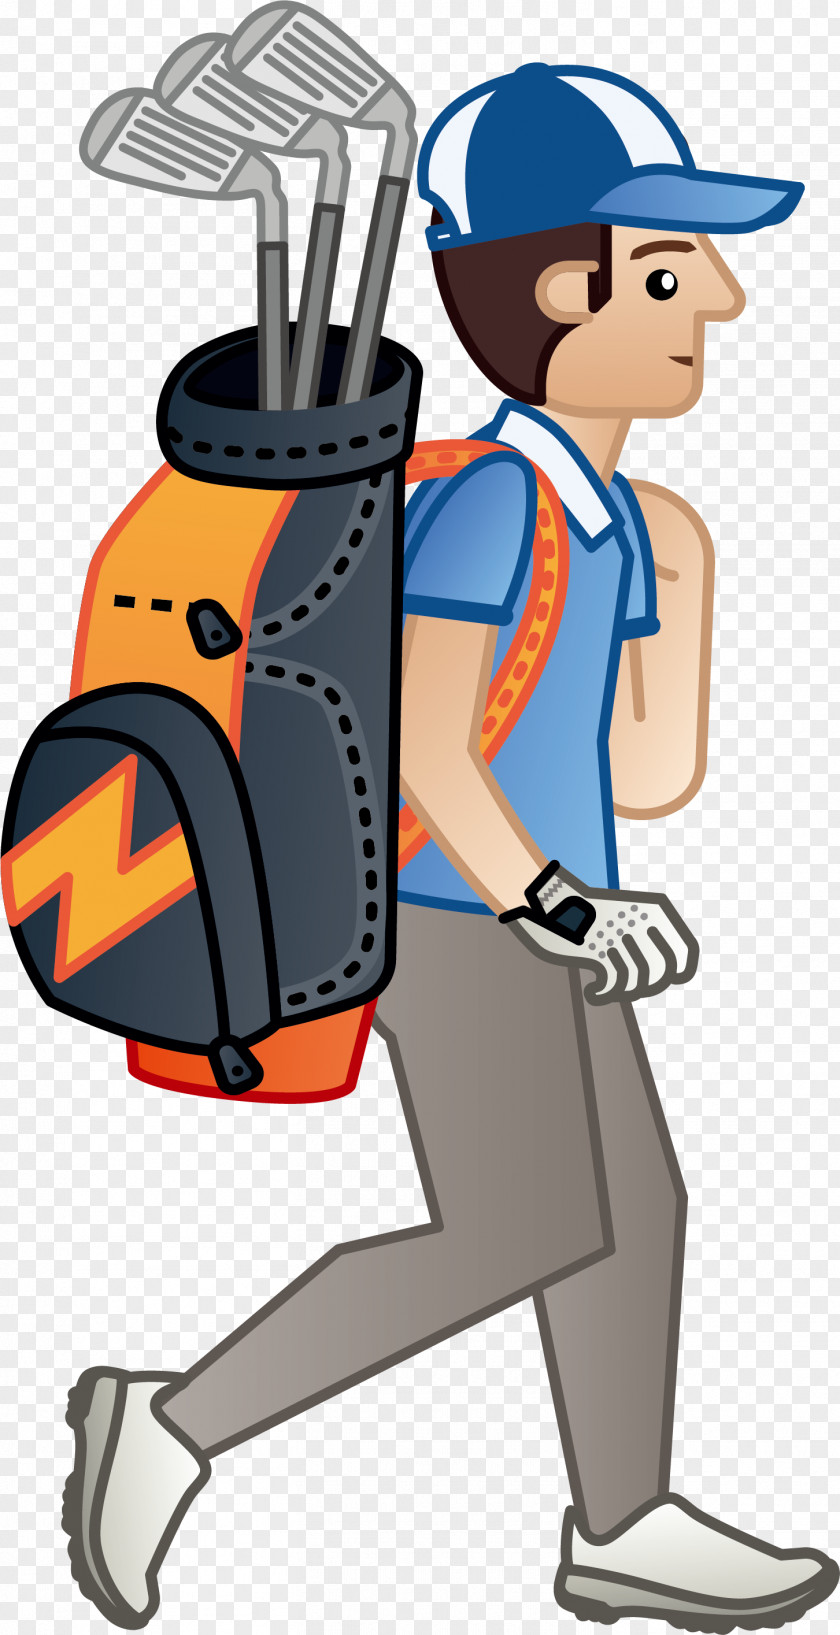 Someone Who Plays Golf Golfer Clip Art PNG